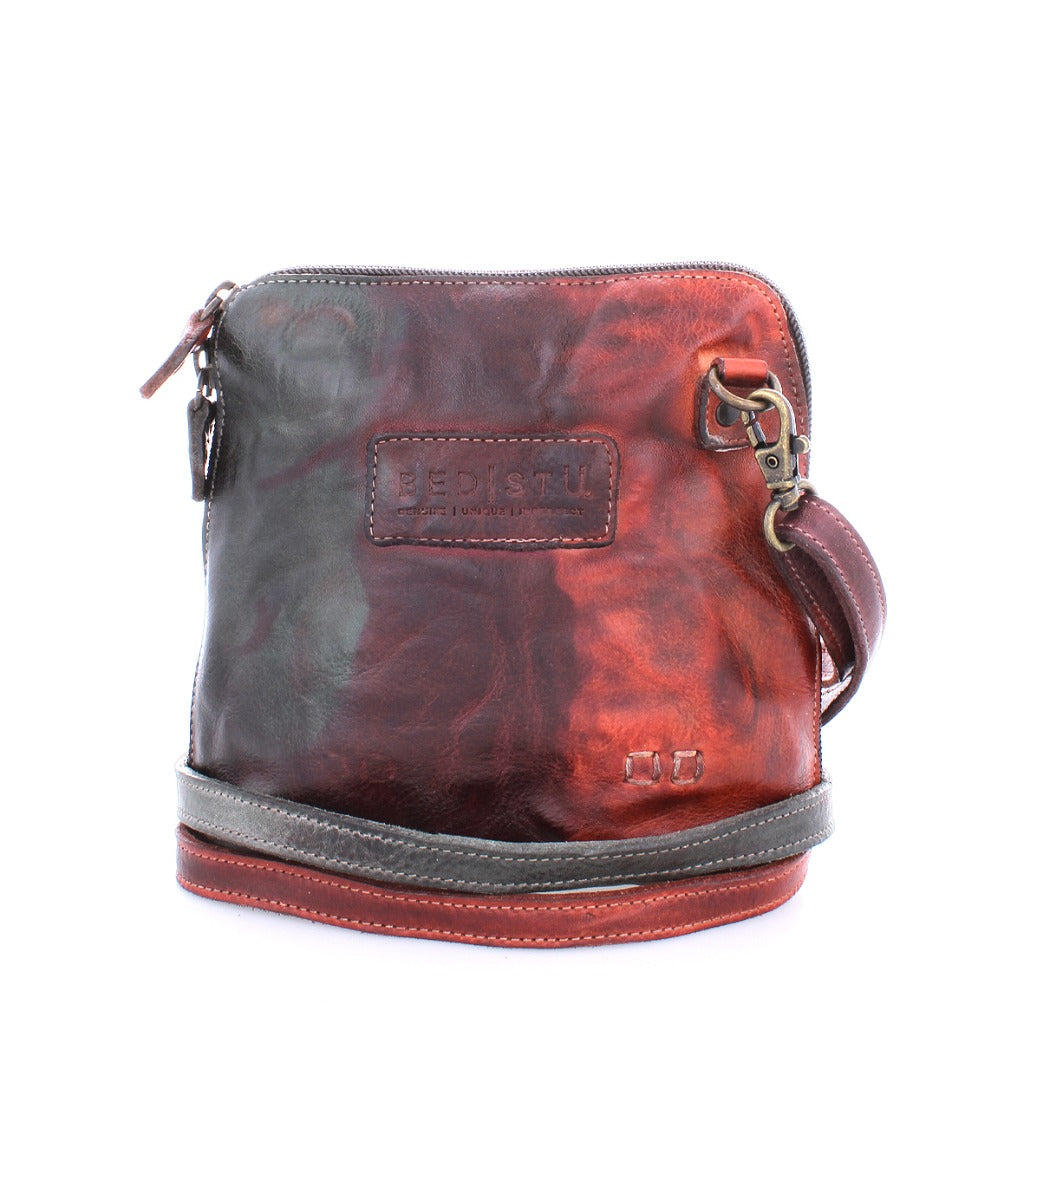 A red and black Ventura cross body bag with a zipper by Bed Stu.